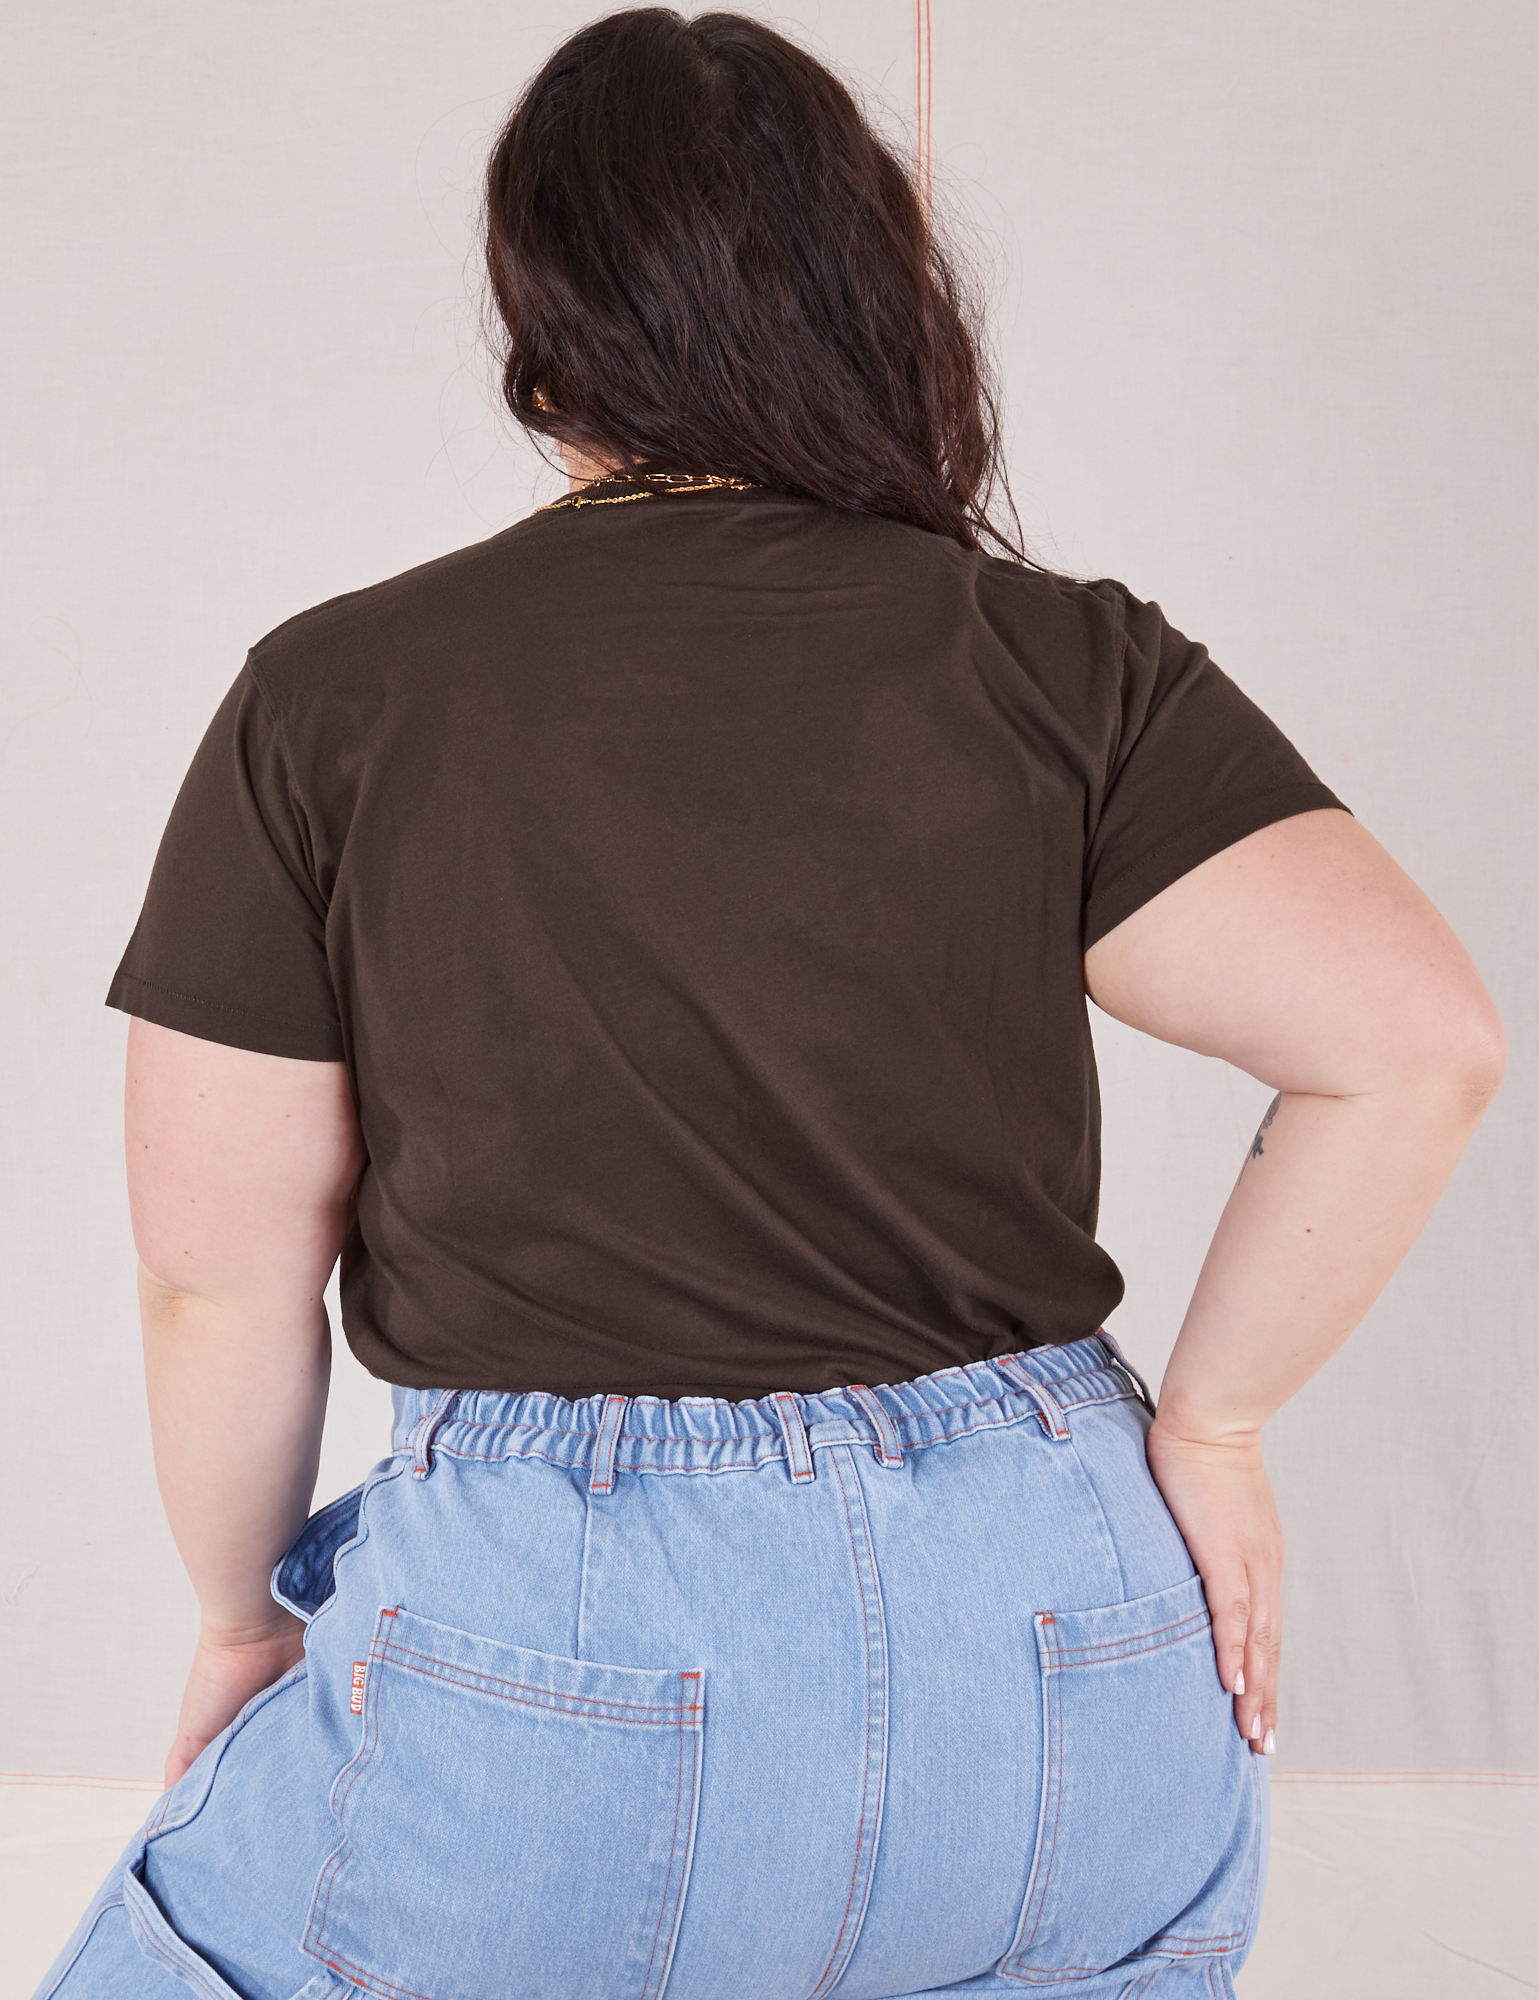 Organic Vintage Tee in Espresso Brown back view on Ashley